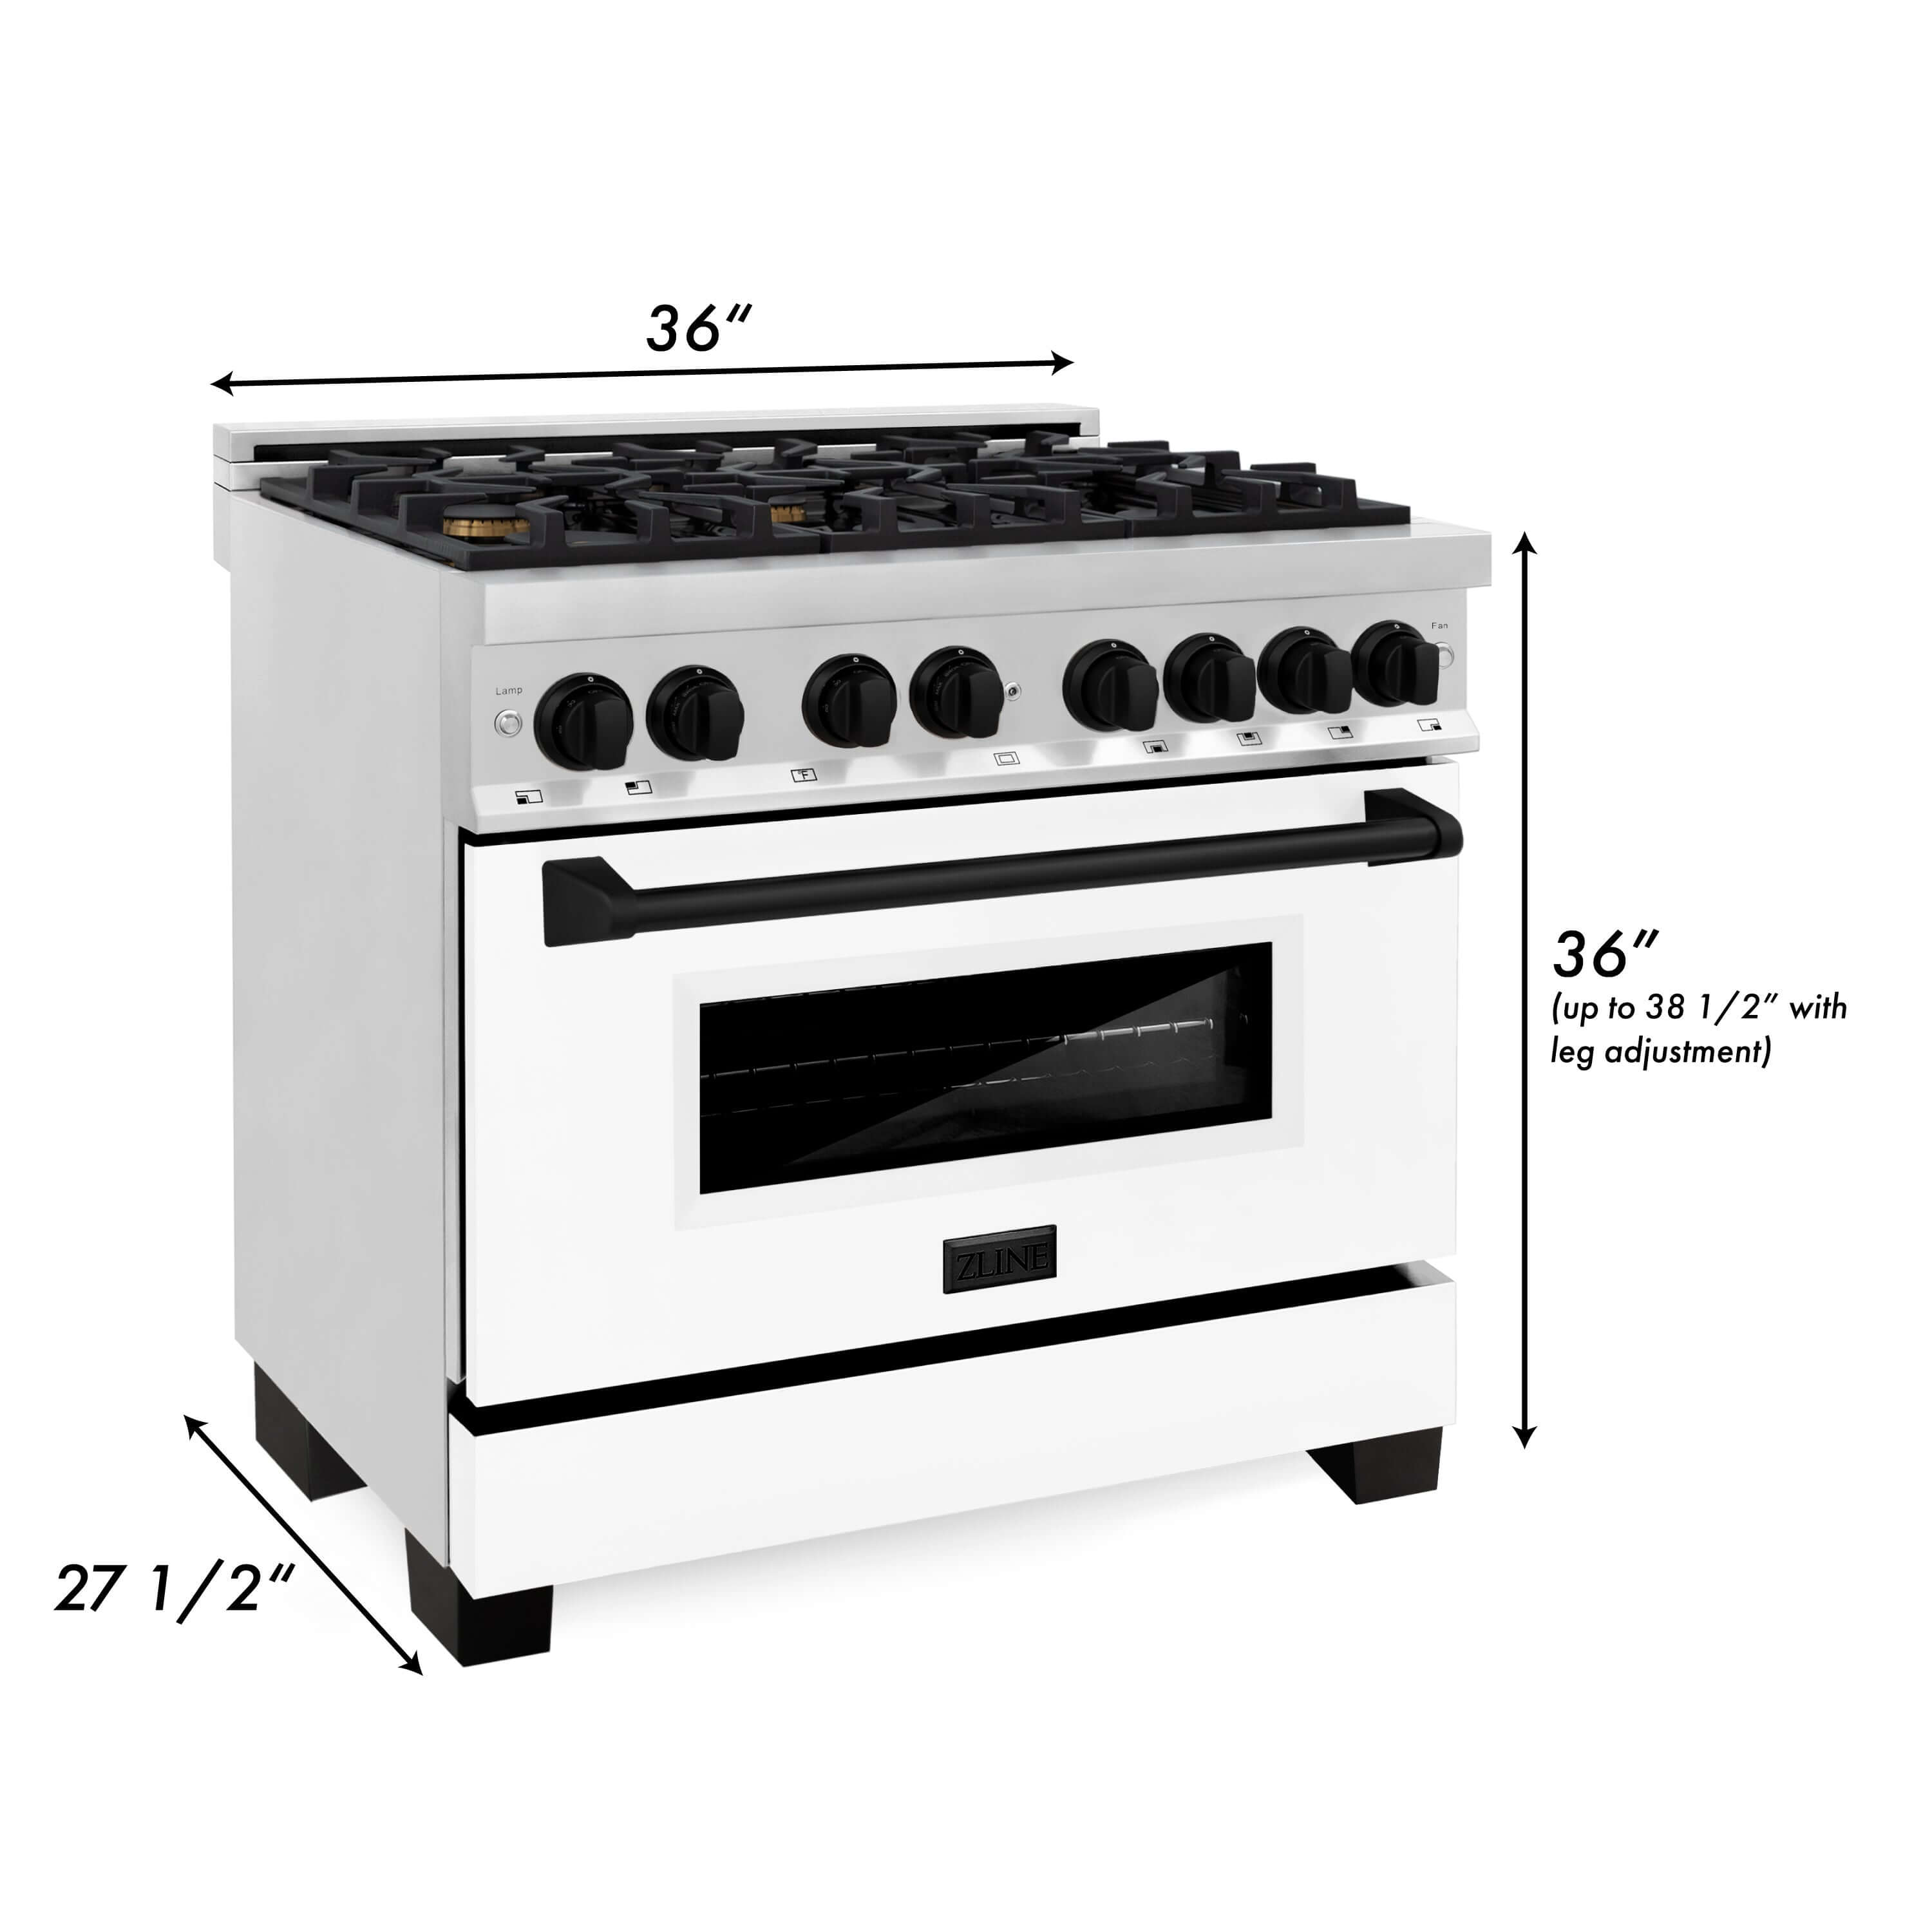 ZLINE Autograph Edition 36 in. Kitchen Package with Stainless Steel Dual Fuel Range with White Matte Door and Range Hood with Matte Black Accents (2AKP-RAWMRH36-MB) dimensional diagram with measurements.